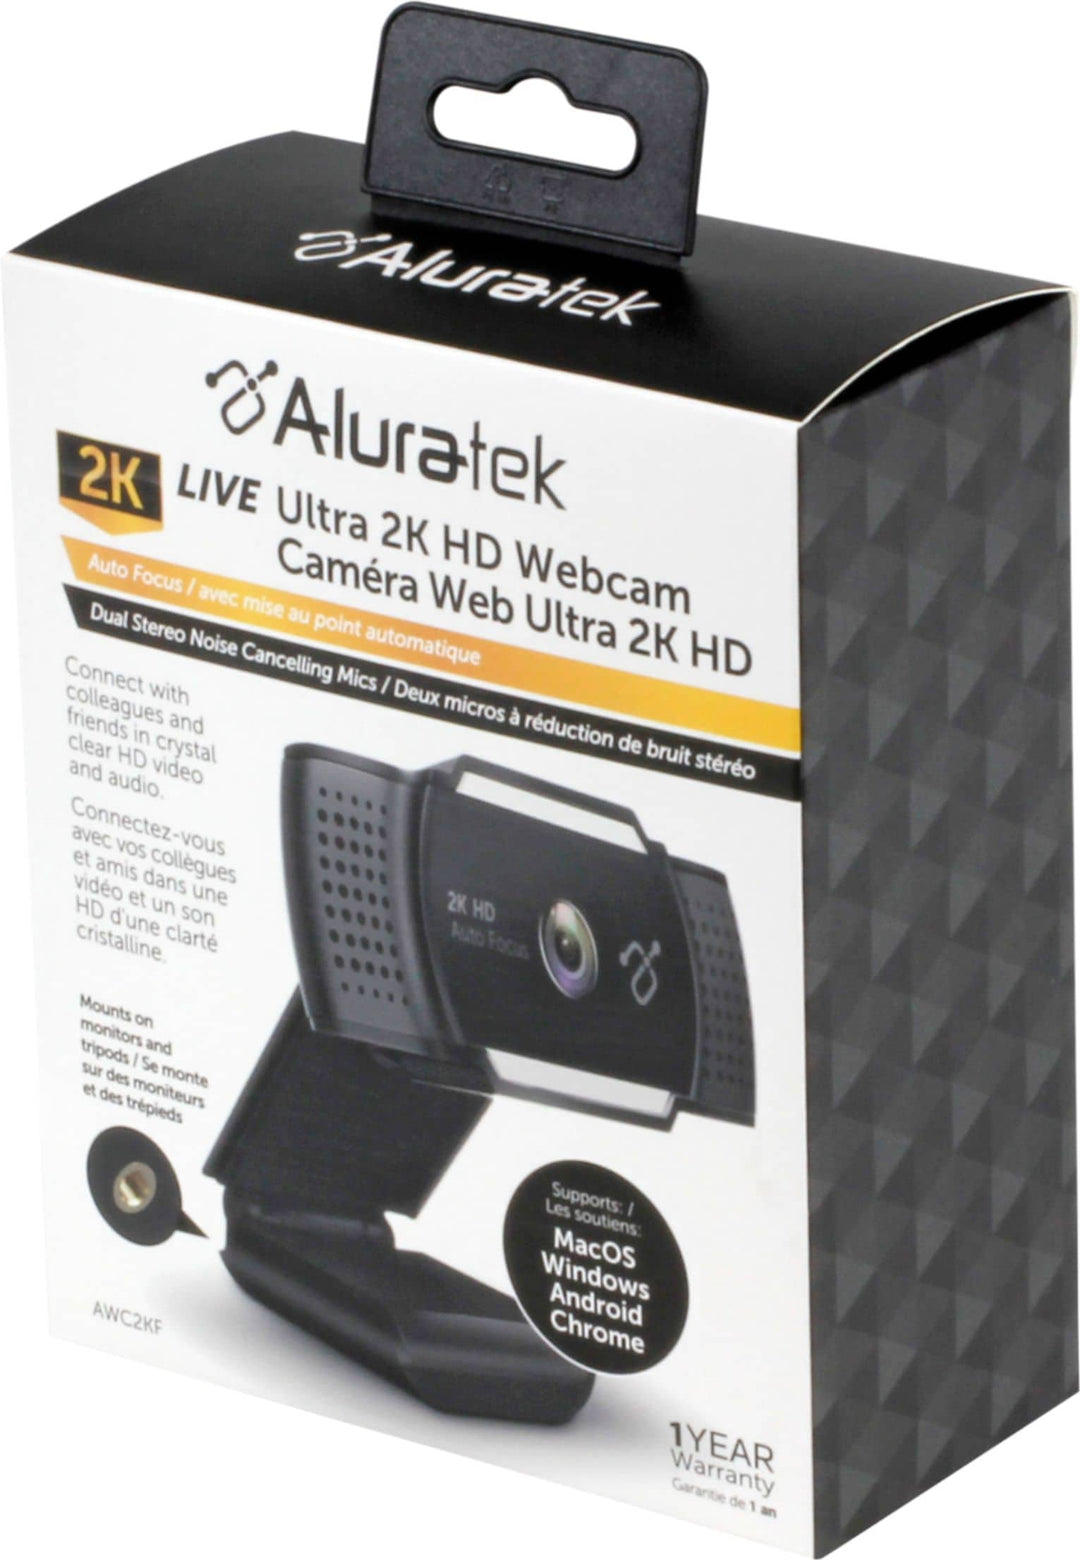 Aluratek - Live Ultra 2K HD 2560 x 1600 Webcam with Auto Focus and Dual Stereo Noise Cancelling Mics - Black_4